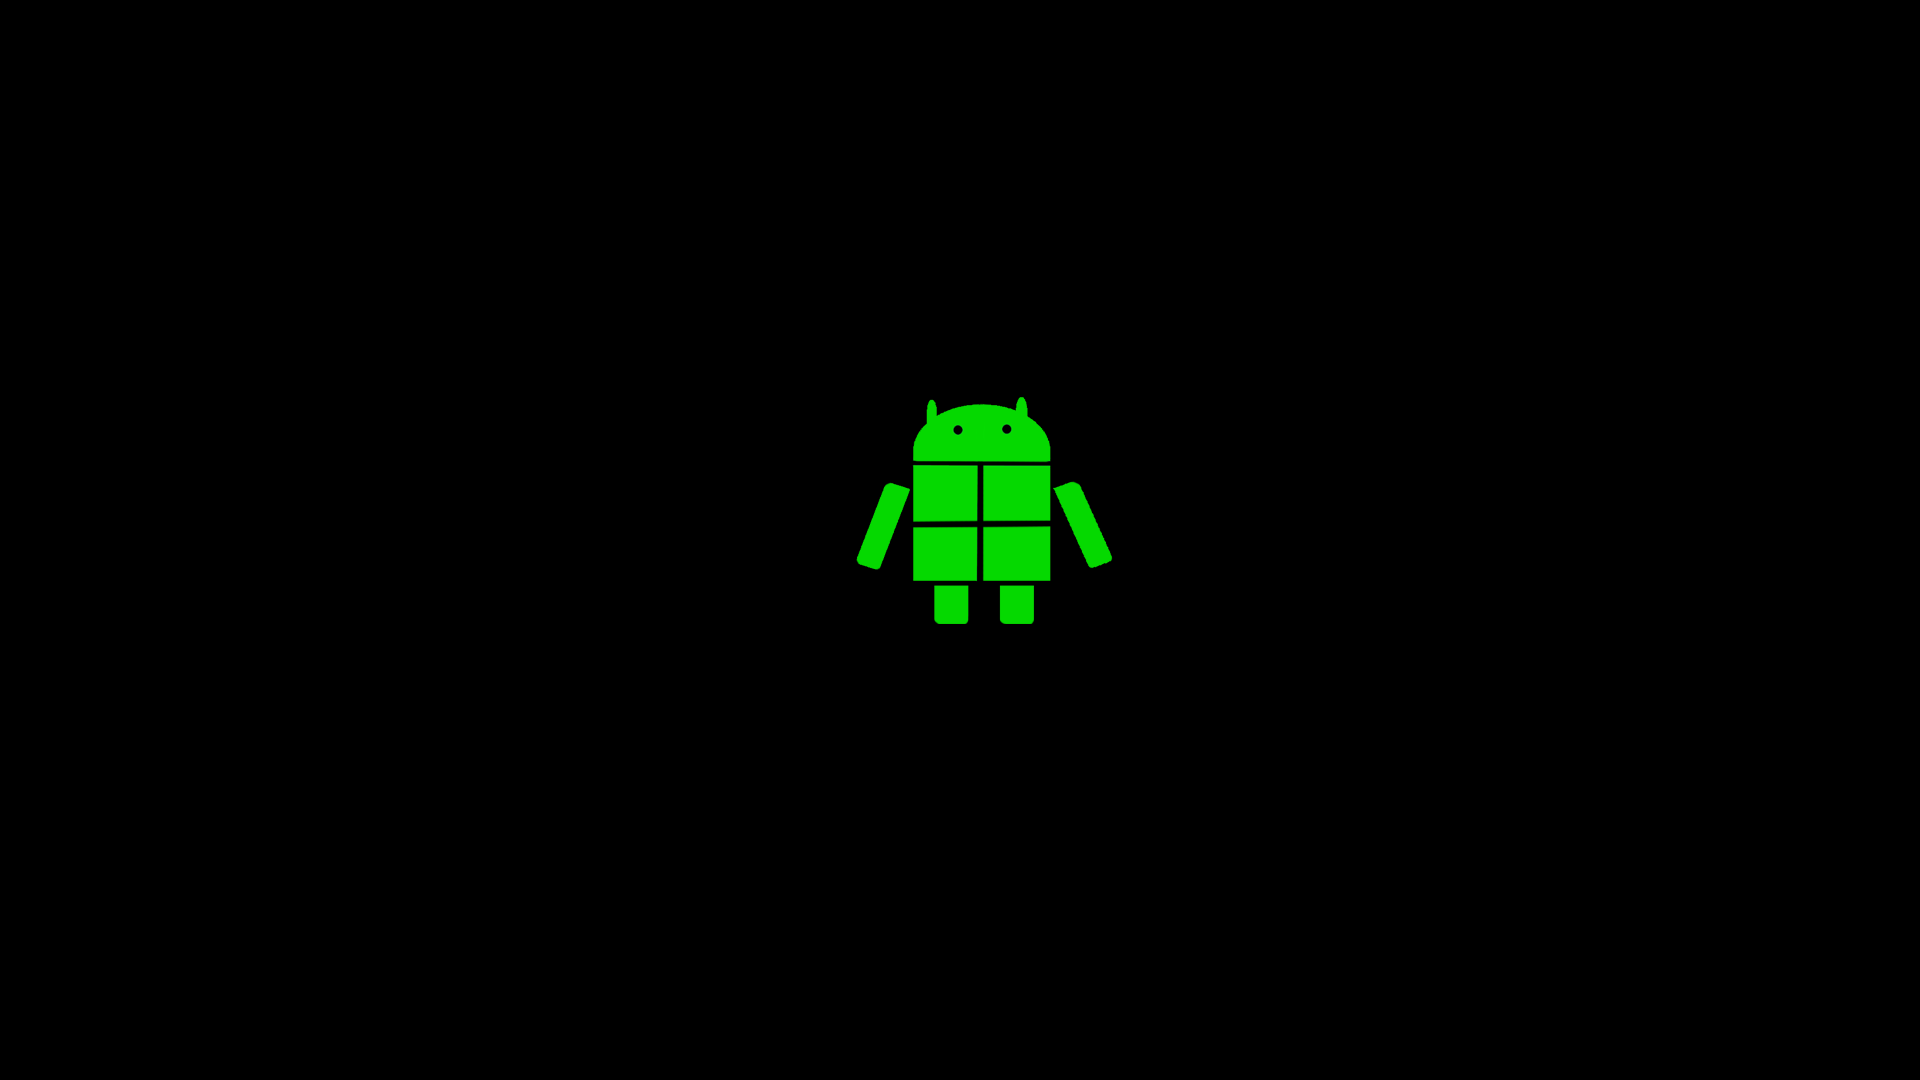 General 1920x1080 minimalism Android (operating system) black background simple background